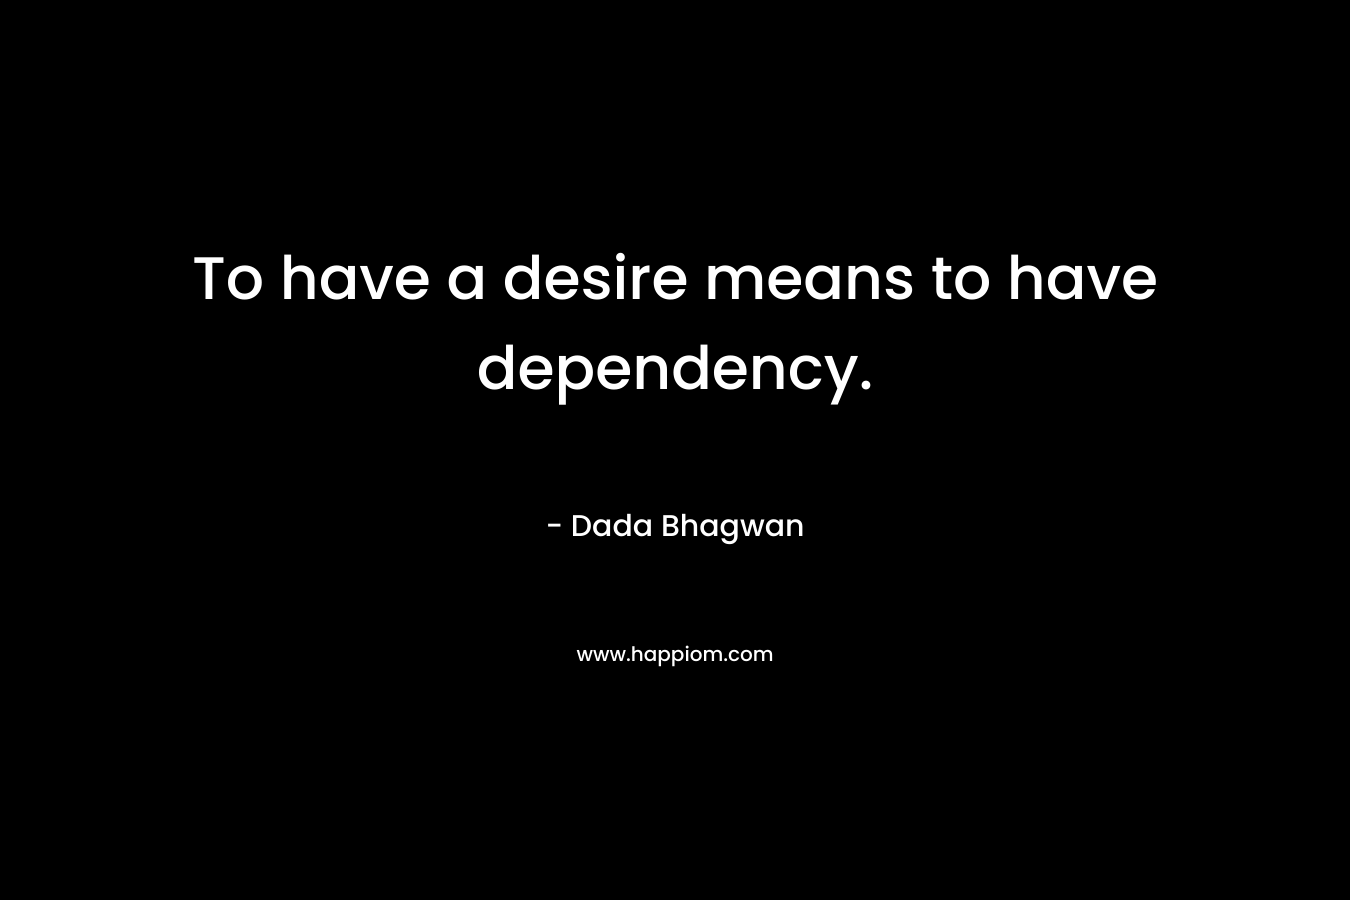 To have a desire means to have dependency. – Dada Bhagwan